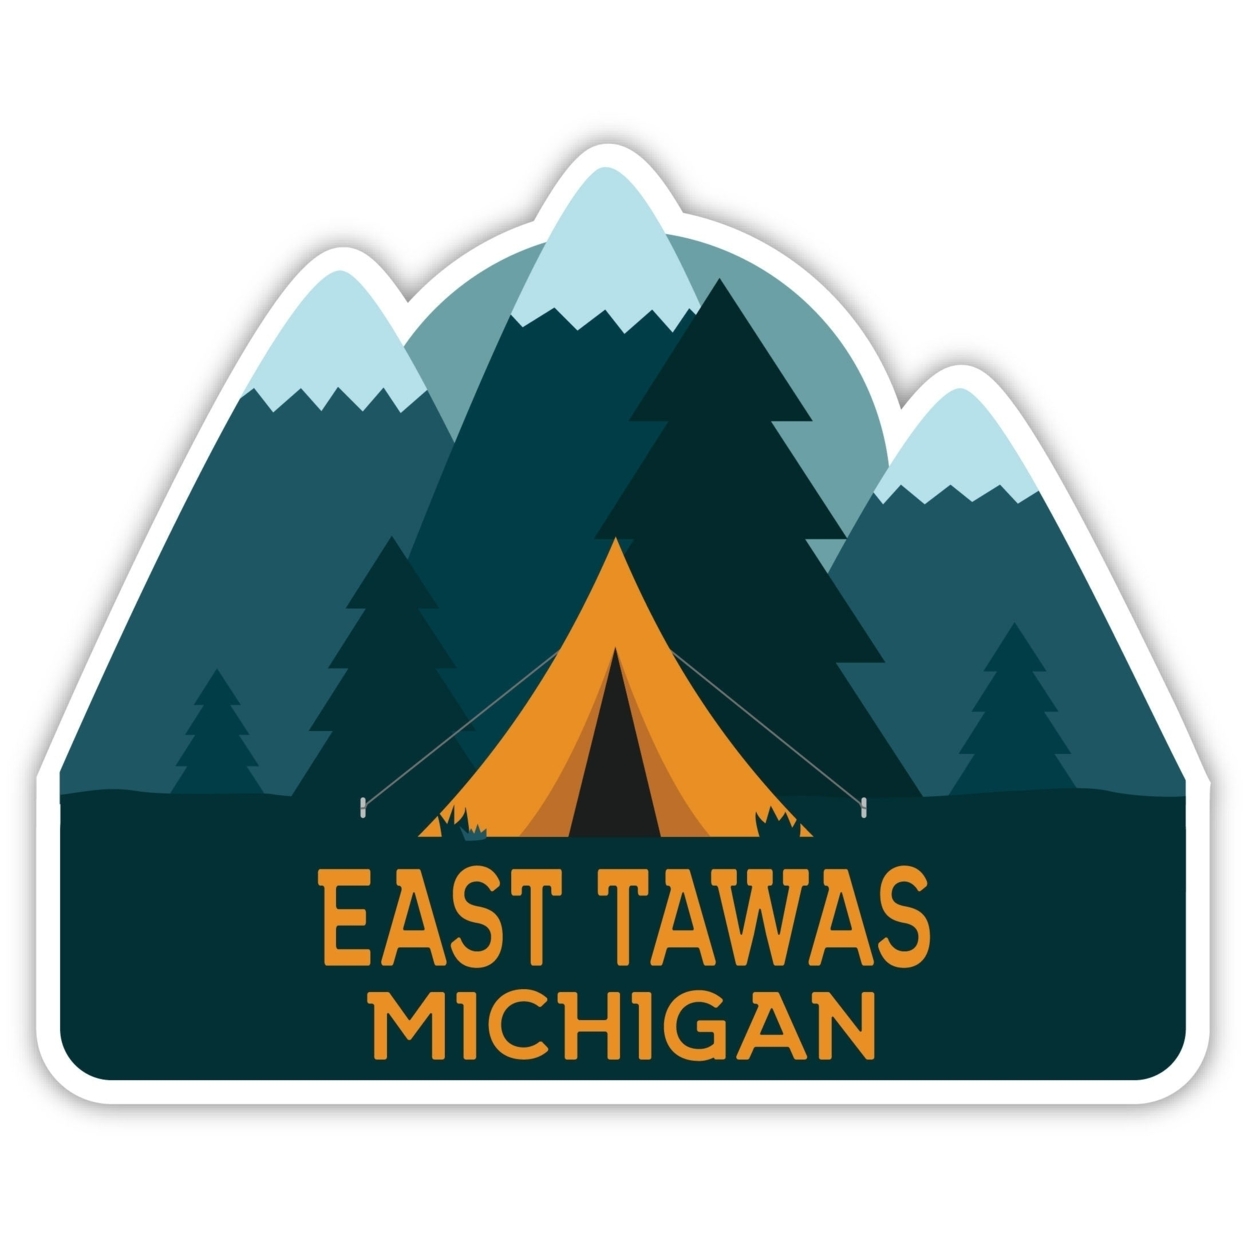 East Tawas Michigan Souvenir Decorative Stickers (Choose Theme And Size) - 4-Pack, 12-Inch, Camp Life